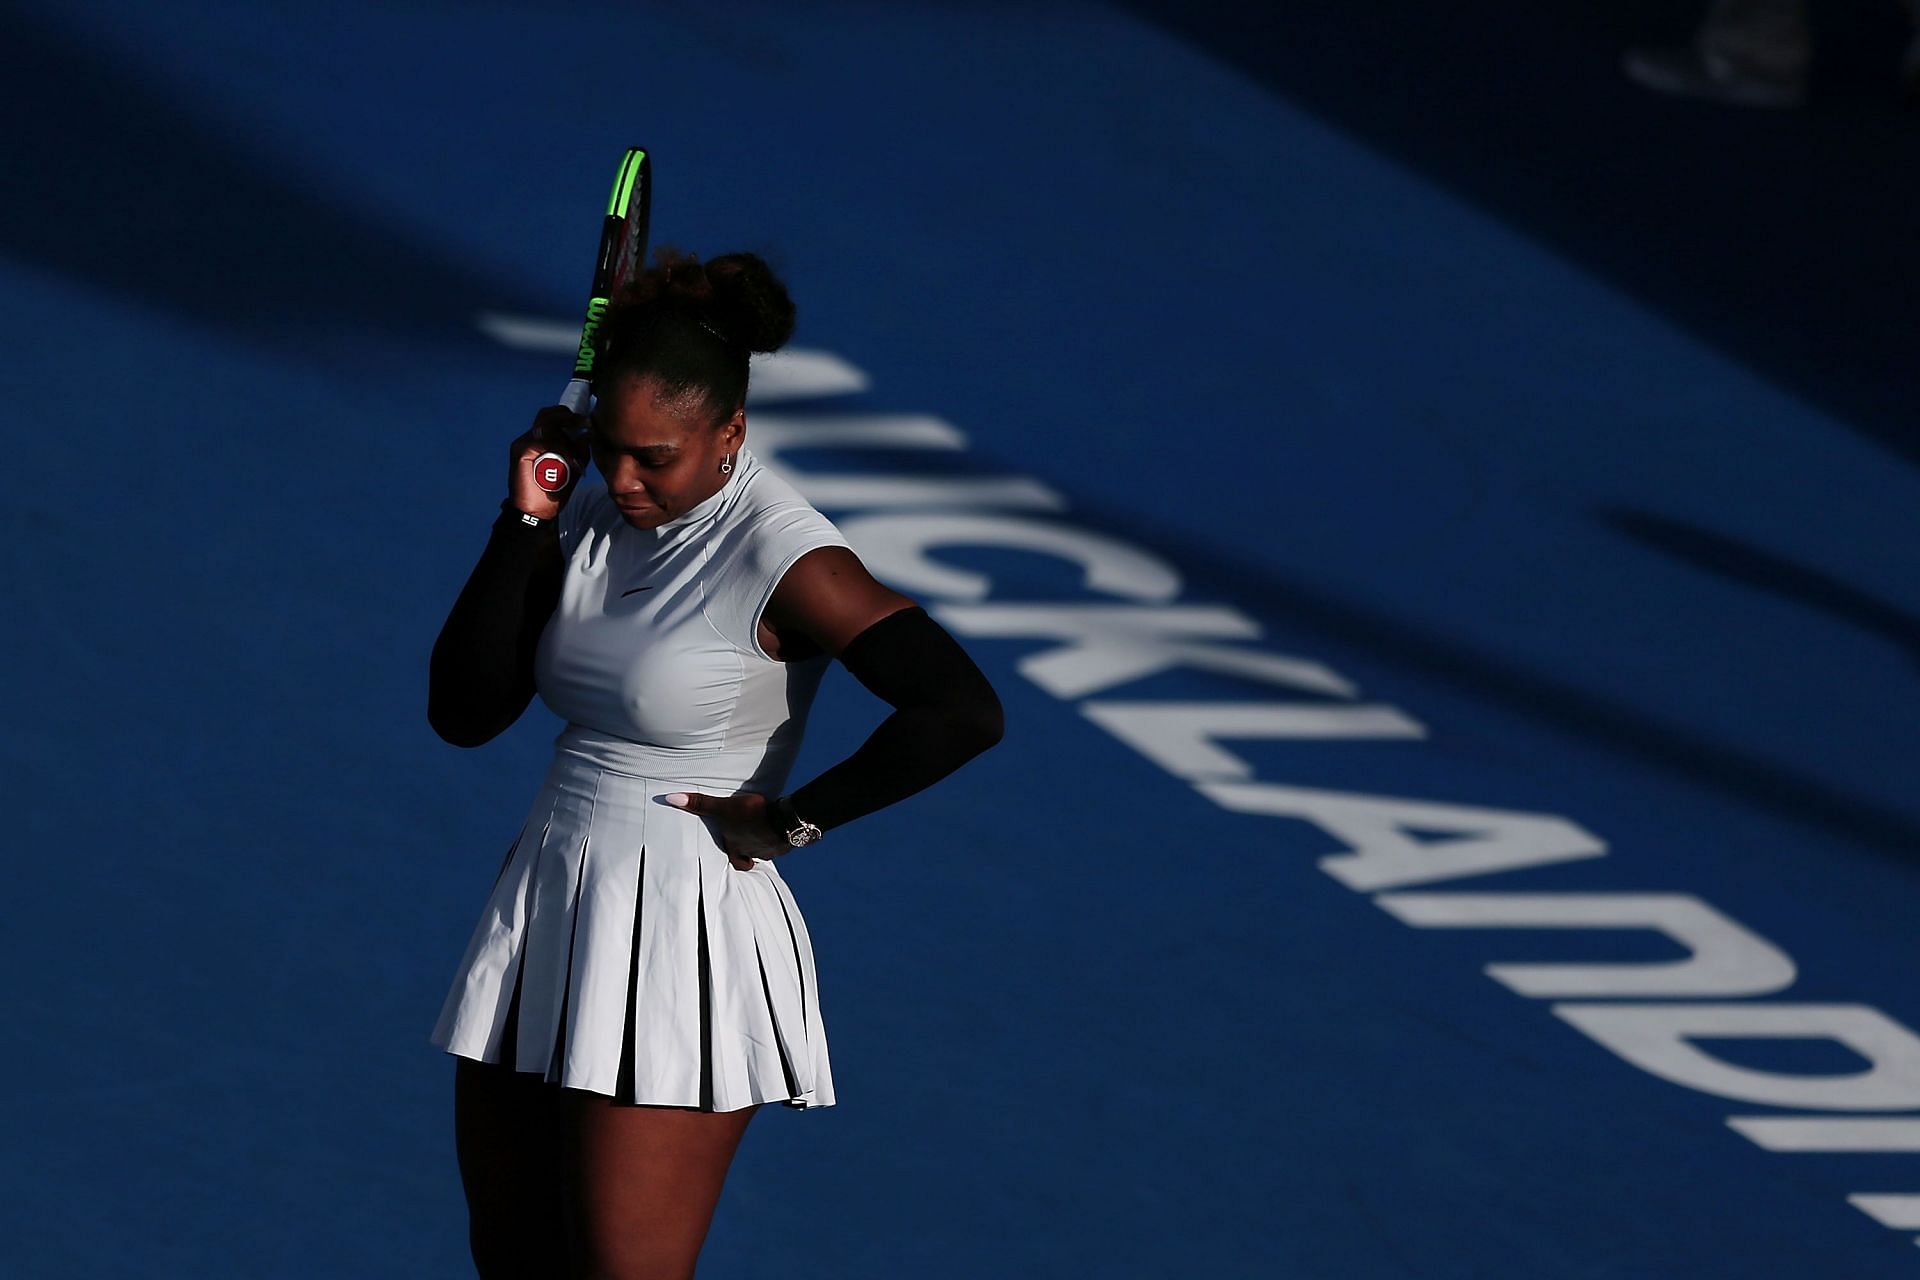 Serena Williams is likely to drop out of the top 200 in the world rankings